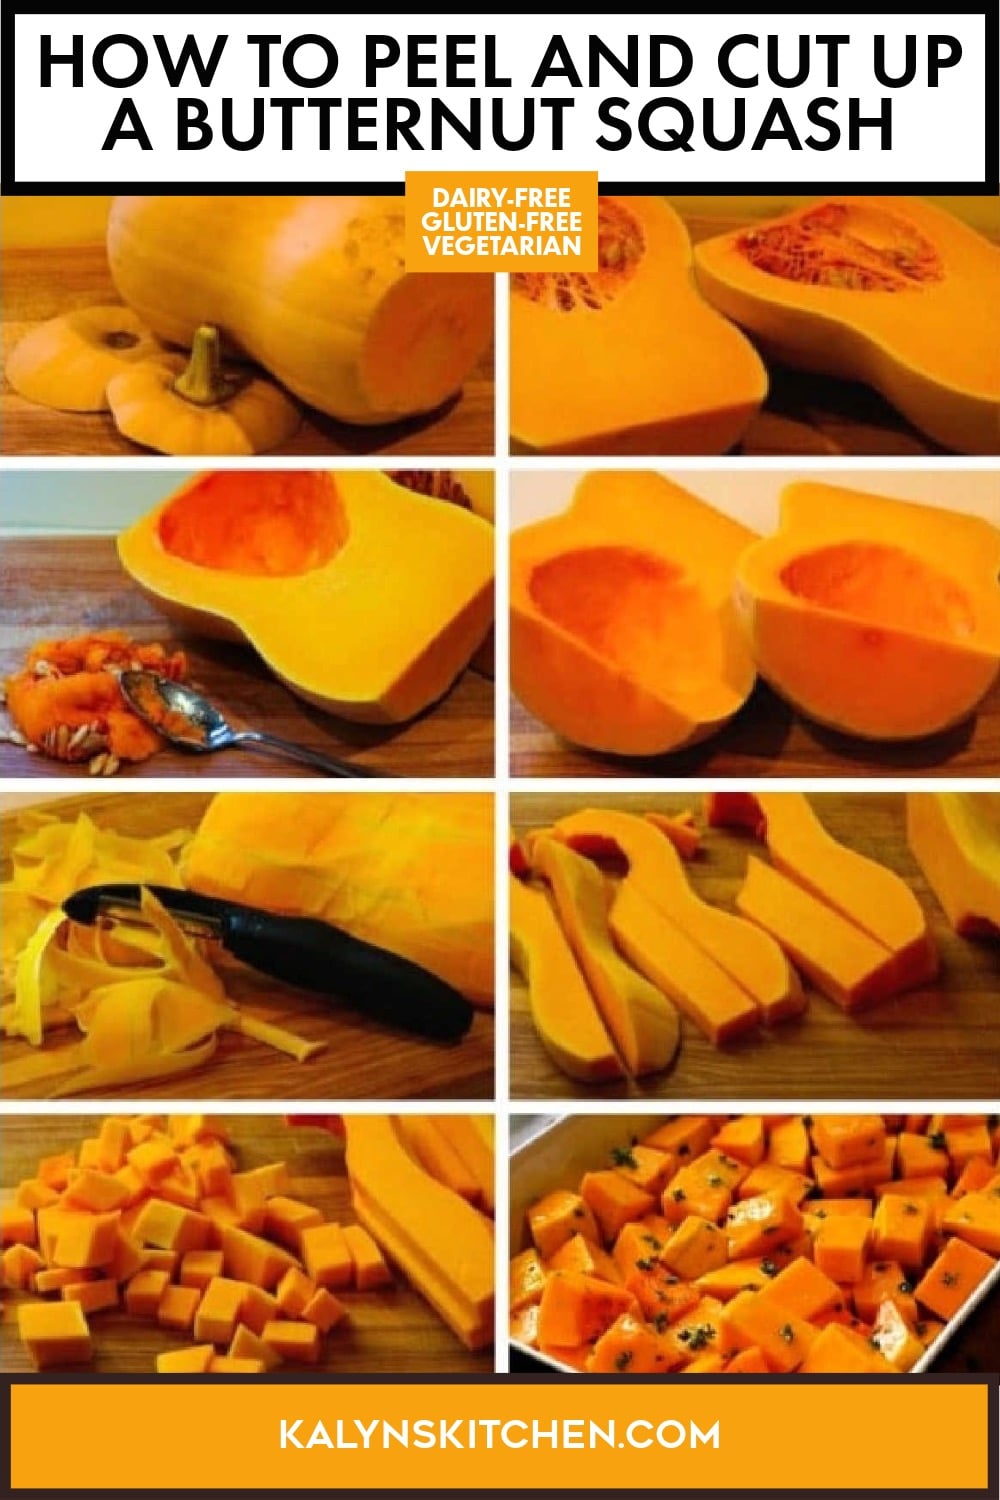 In this Cooking Tips post, I'm going to teach you some easy steps for How to Peel and Cut Up a Butternut Squash. And while I don't judge if you buy pre-cut butternut squash cubes, the freshly peeled and cut squash is so much more flavorful and less expensive! [found on kalynskitchen.com] #ButternutSquash #HowToPeelCutButternutSquash #HowToPeelButternutSquash